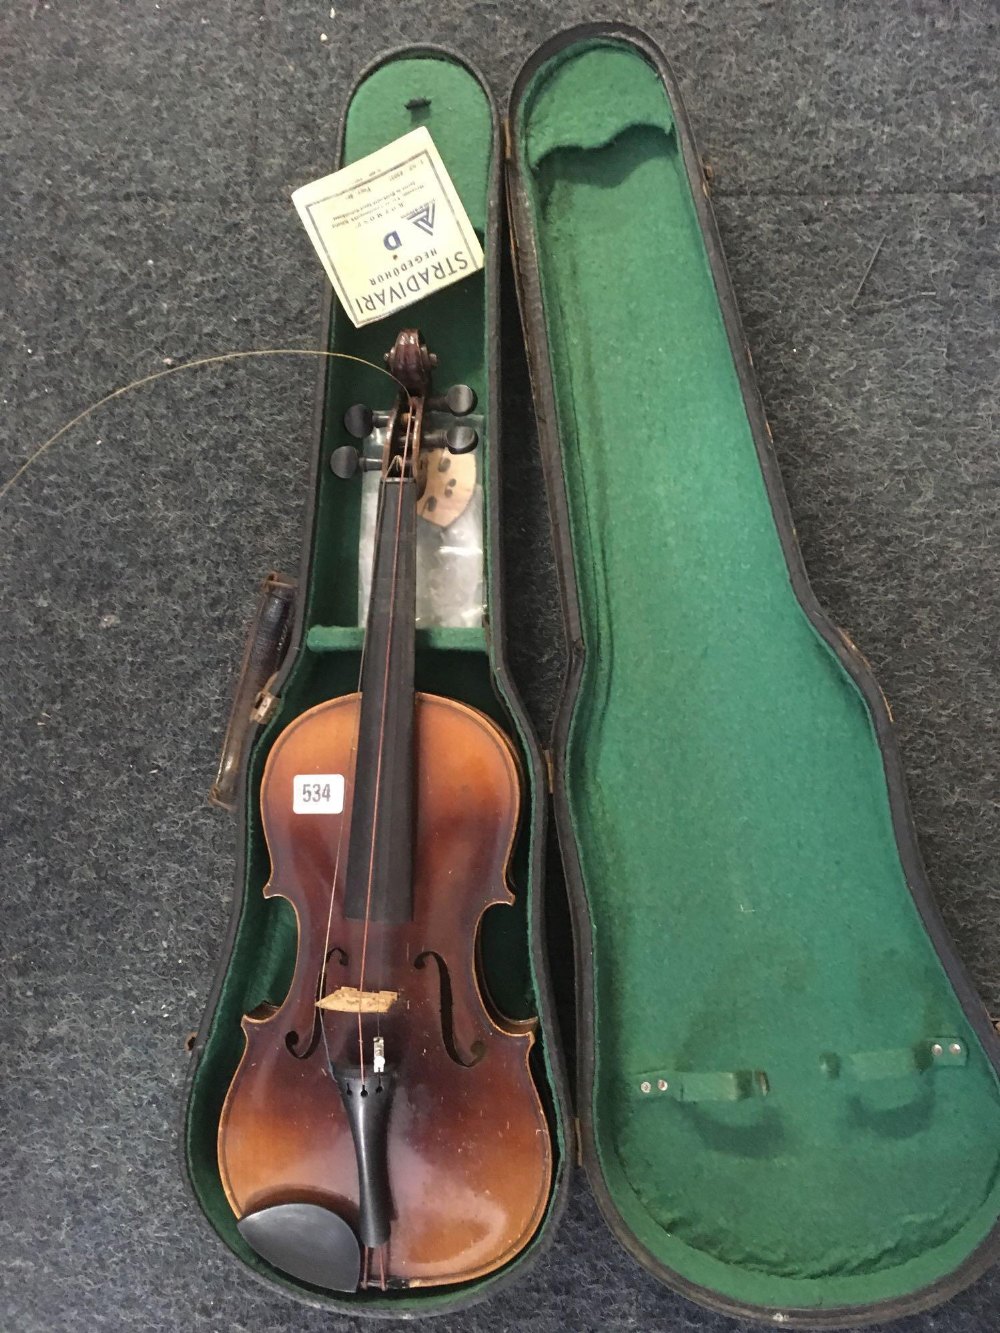 STRIDIVRI VIOLIN ON ORIGINAL CASE & A CASED MANDOLIN WITH BUTTERFLY INLAY A/F - Image 4 of 5